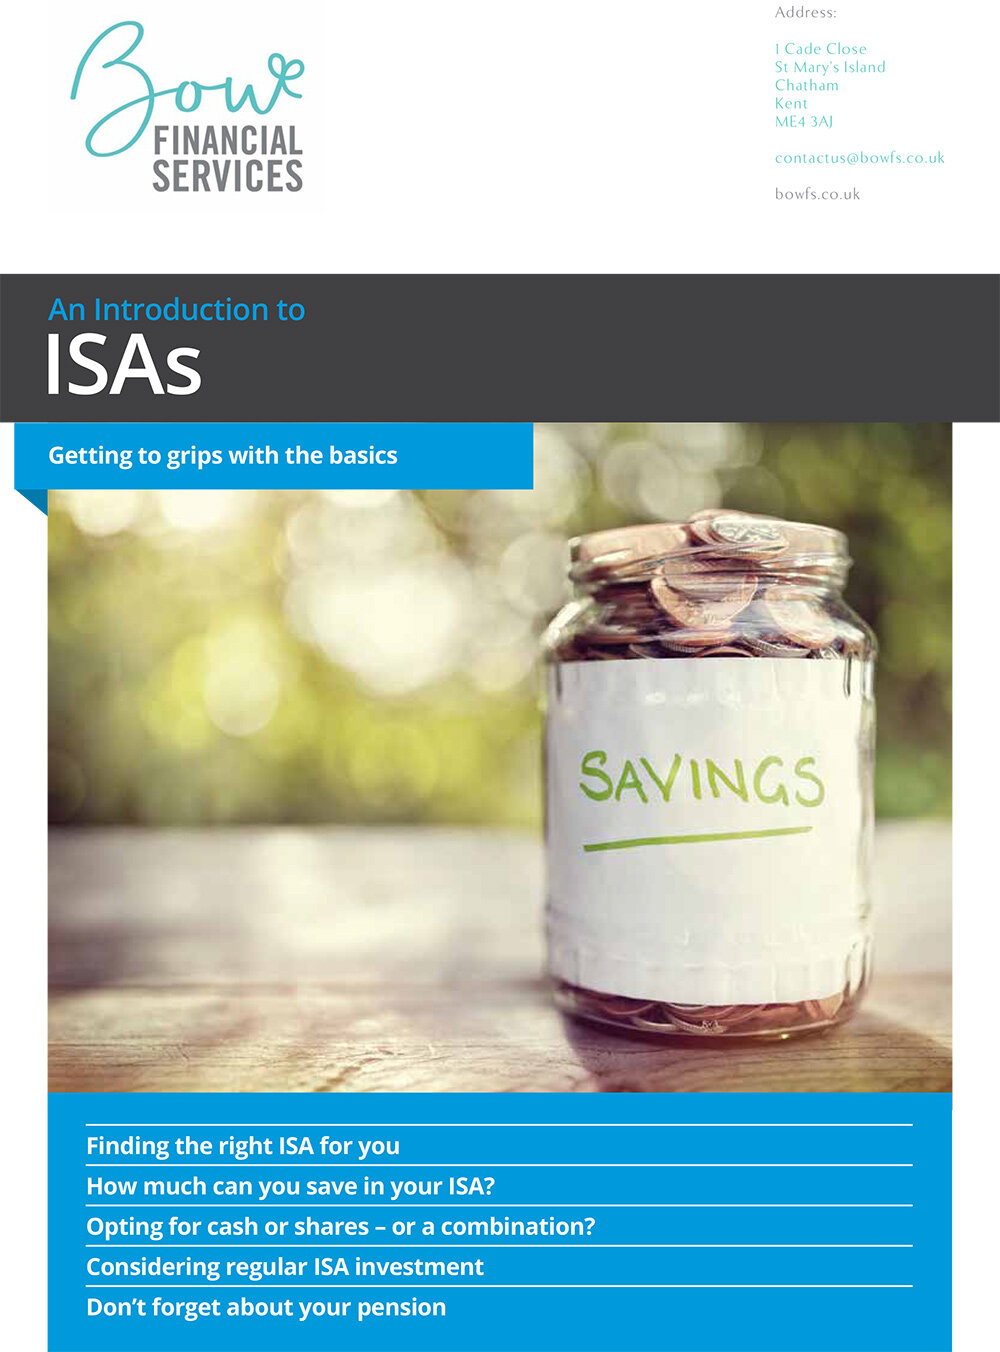 An-Introduction-to-ISAs---January-2020-2.jpg